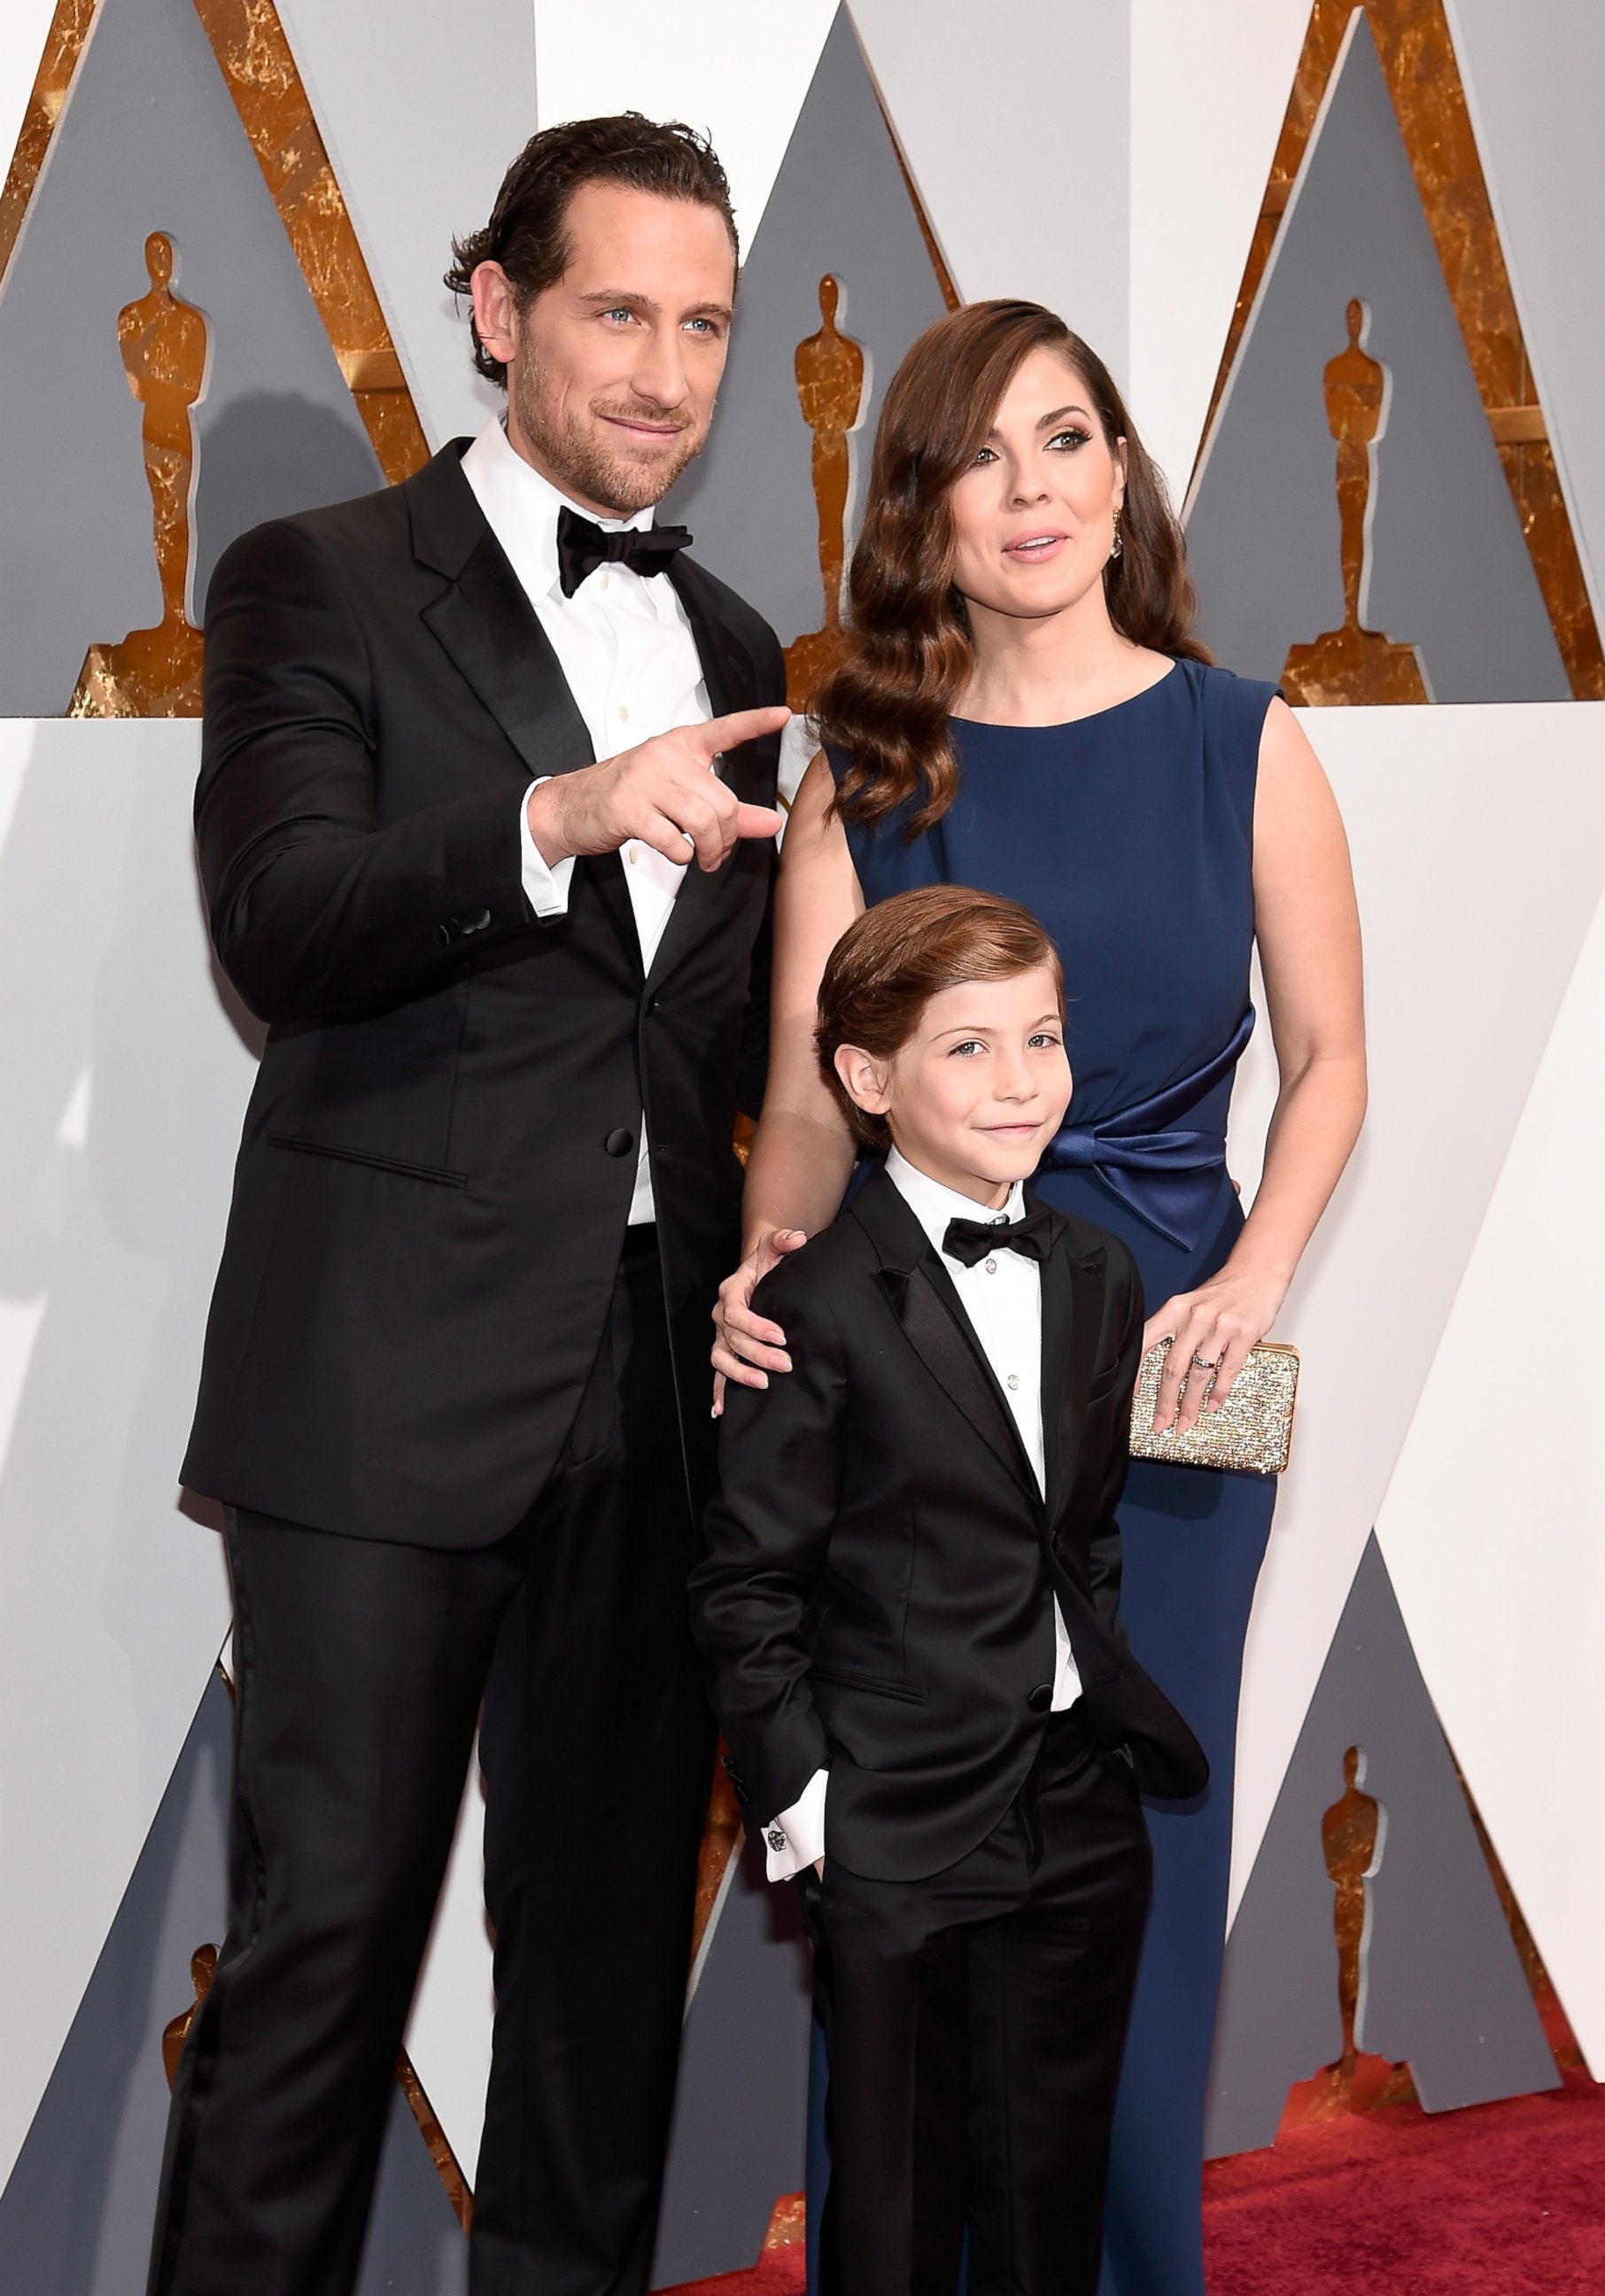 PHOTO: Jason Tremblay, Jacob Tremblay, and Christina Candia Tremblay attend the 88th Annual Academy Awards, Feb. 28, 2016, in Hollywood, Calif. 